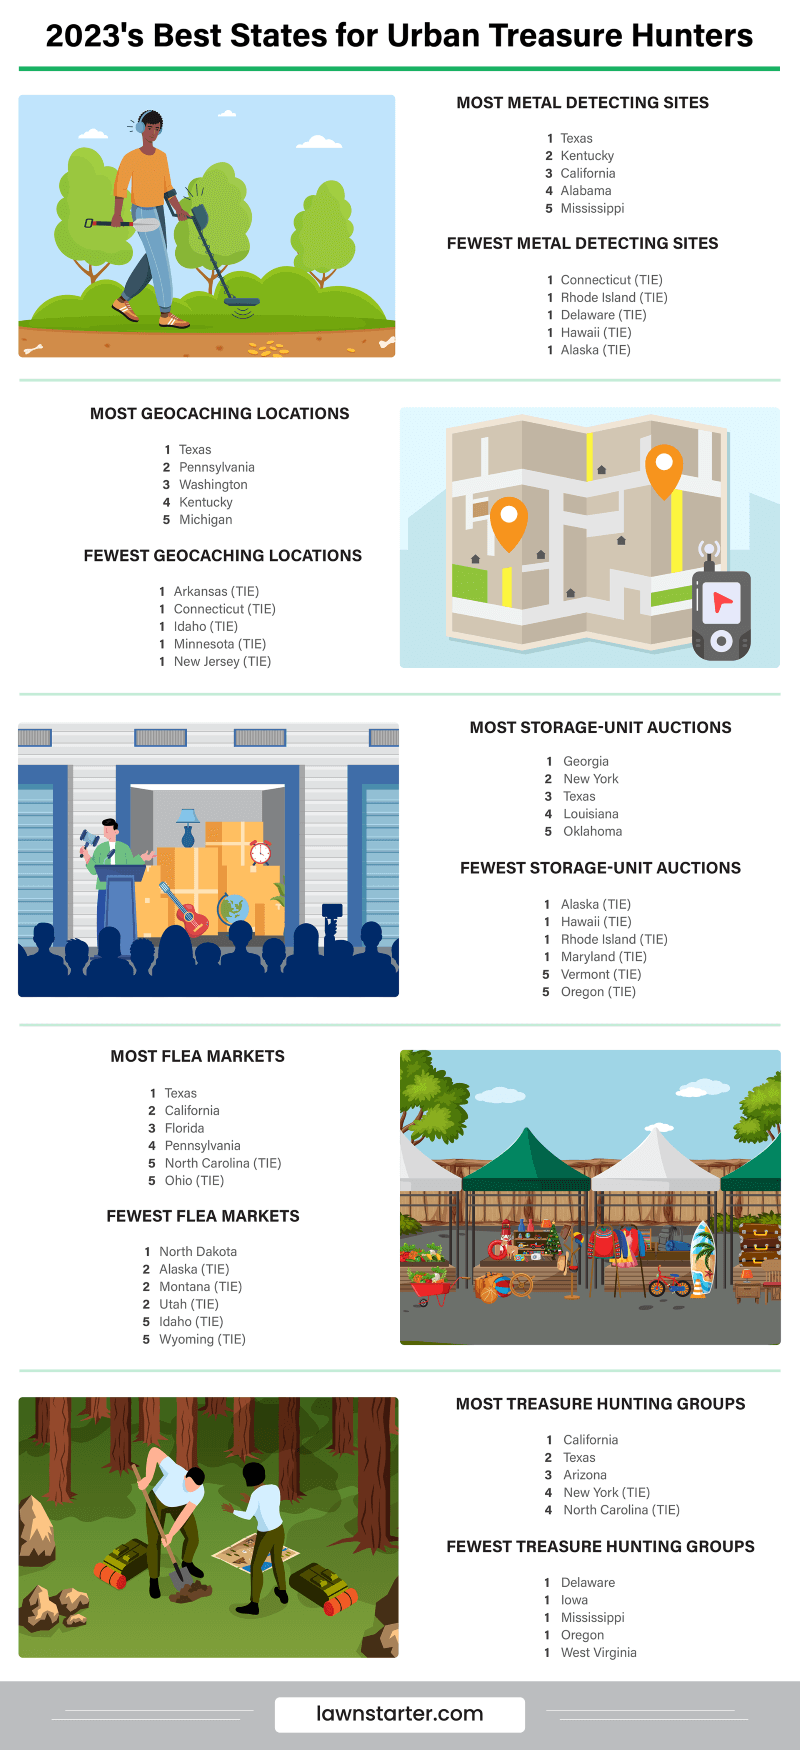 Infographic showing the Best States for Urban Treasure Hunters, a ranking based on the number of geocaching locations, antique shops, metal detecting clubs, and more